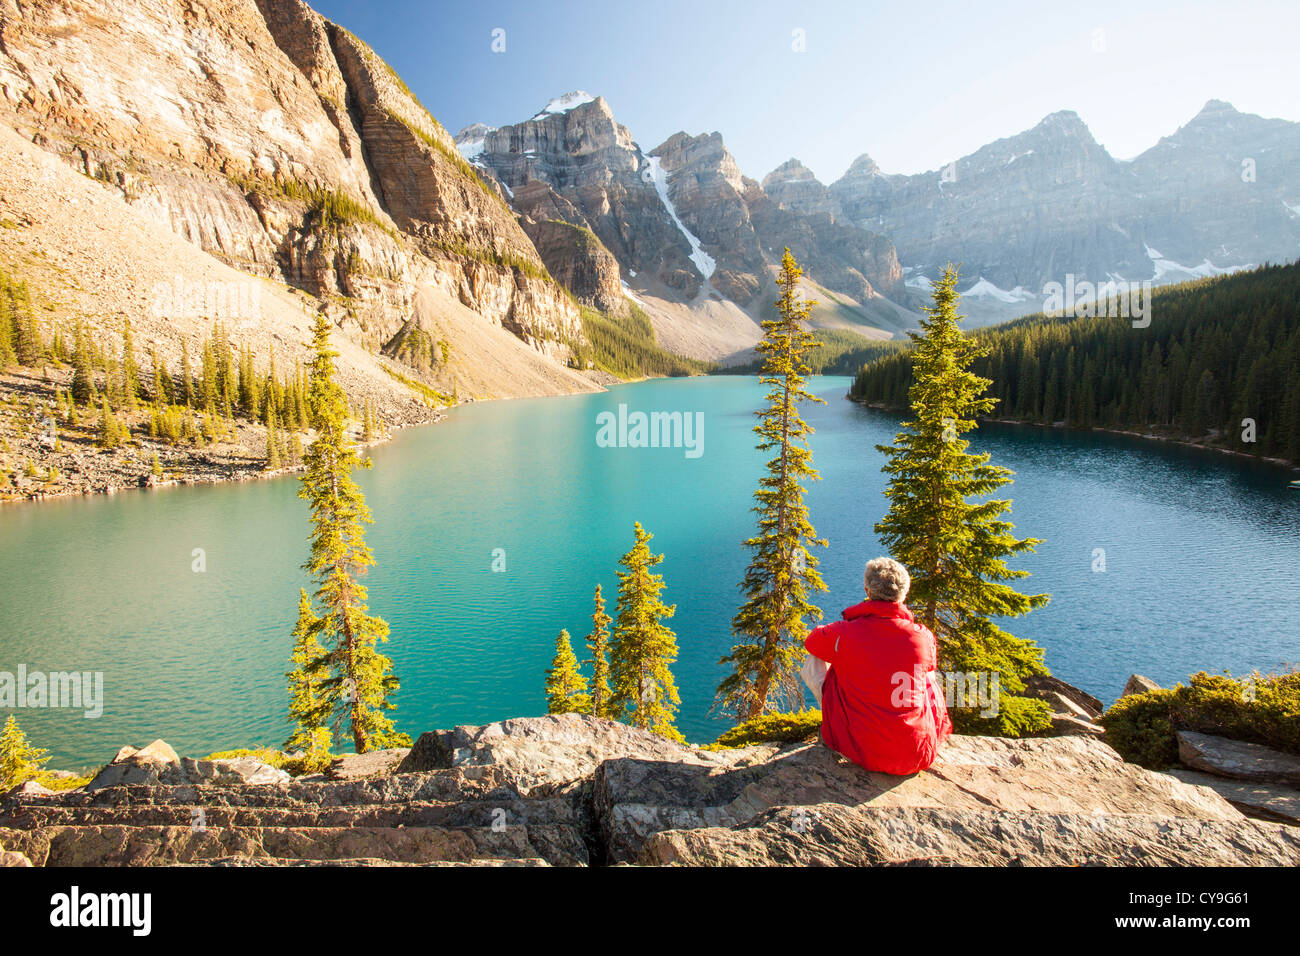 Moraine Lake in the Canadian Rockies is one of the most picturesque, beautiful places in the whole of the Rocky mountains. Stock Photo